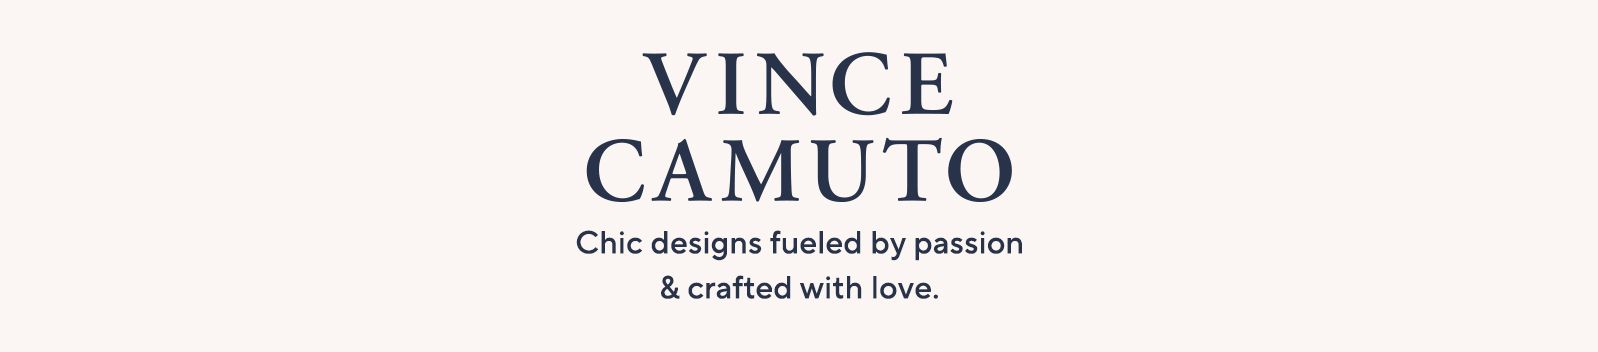 Vince Camuto.  Chic designs fueled by passion & crafted with love